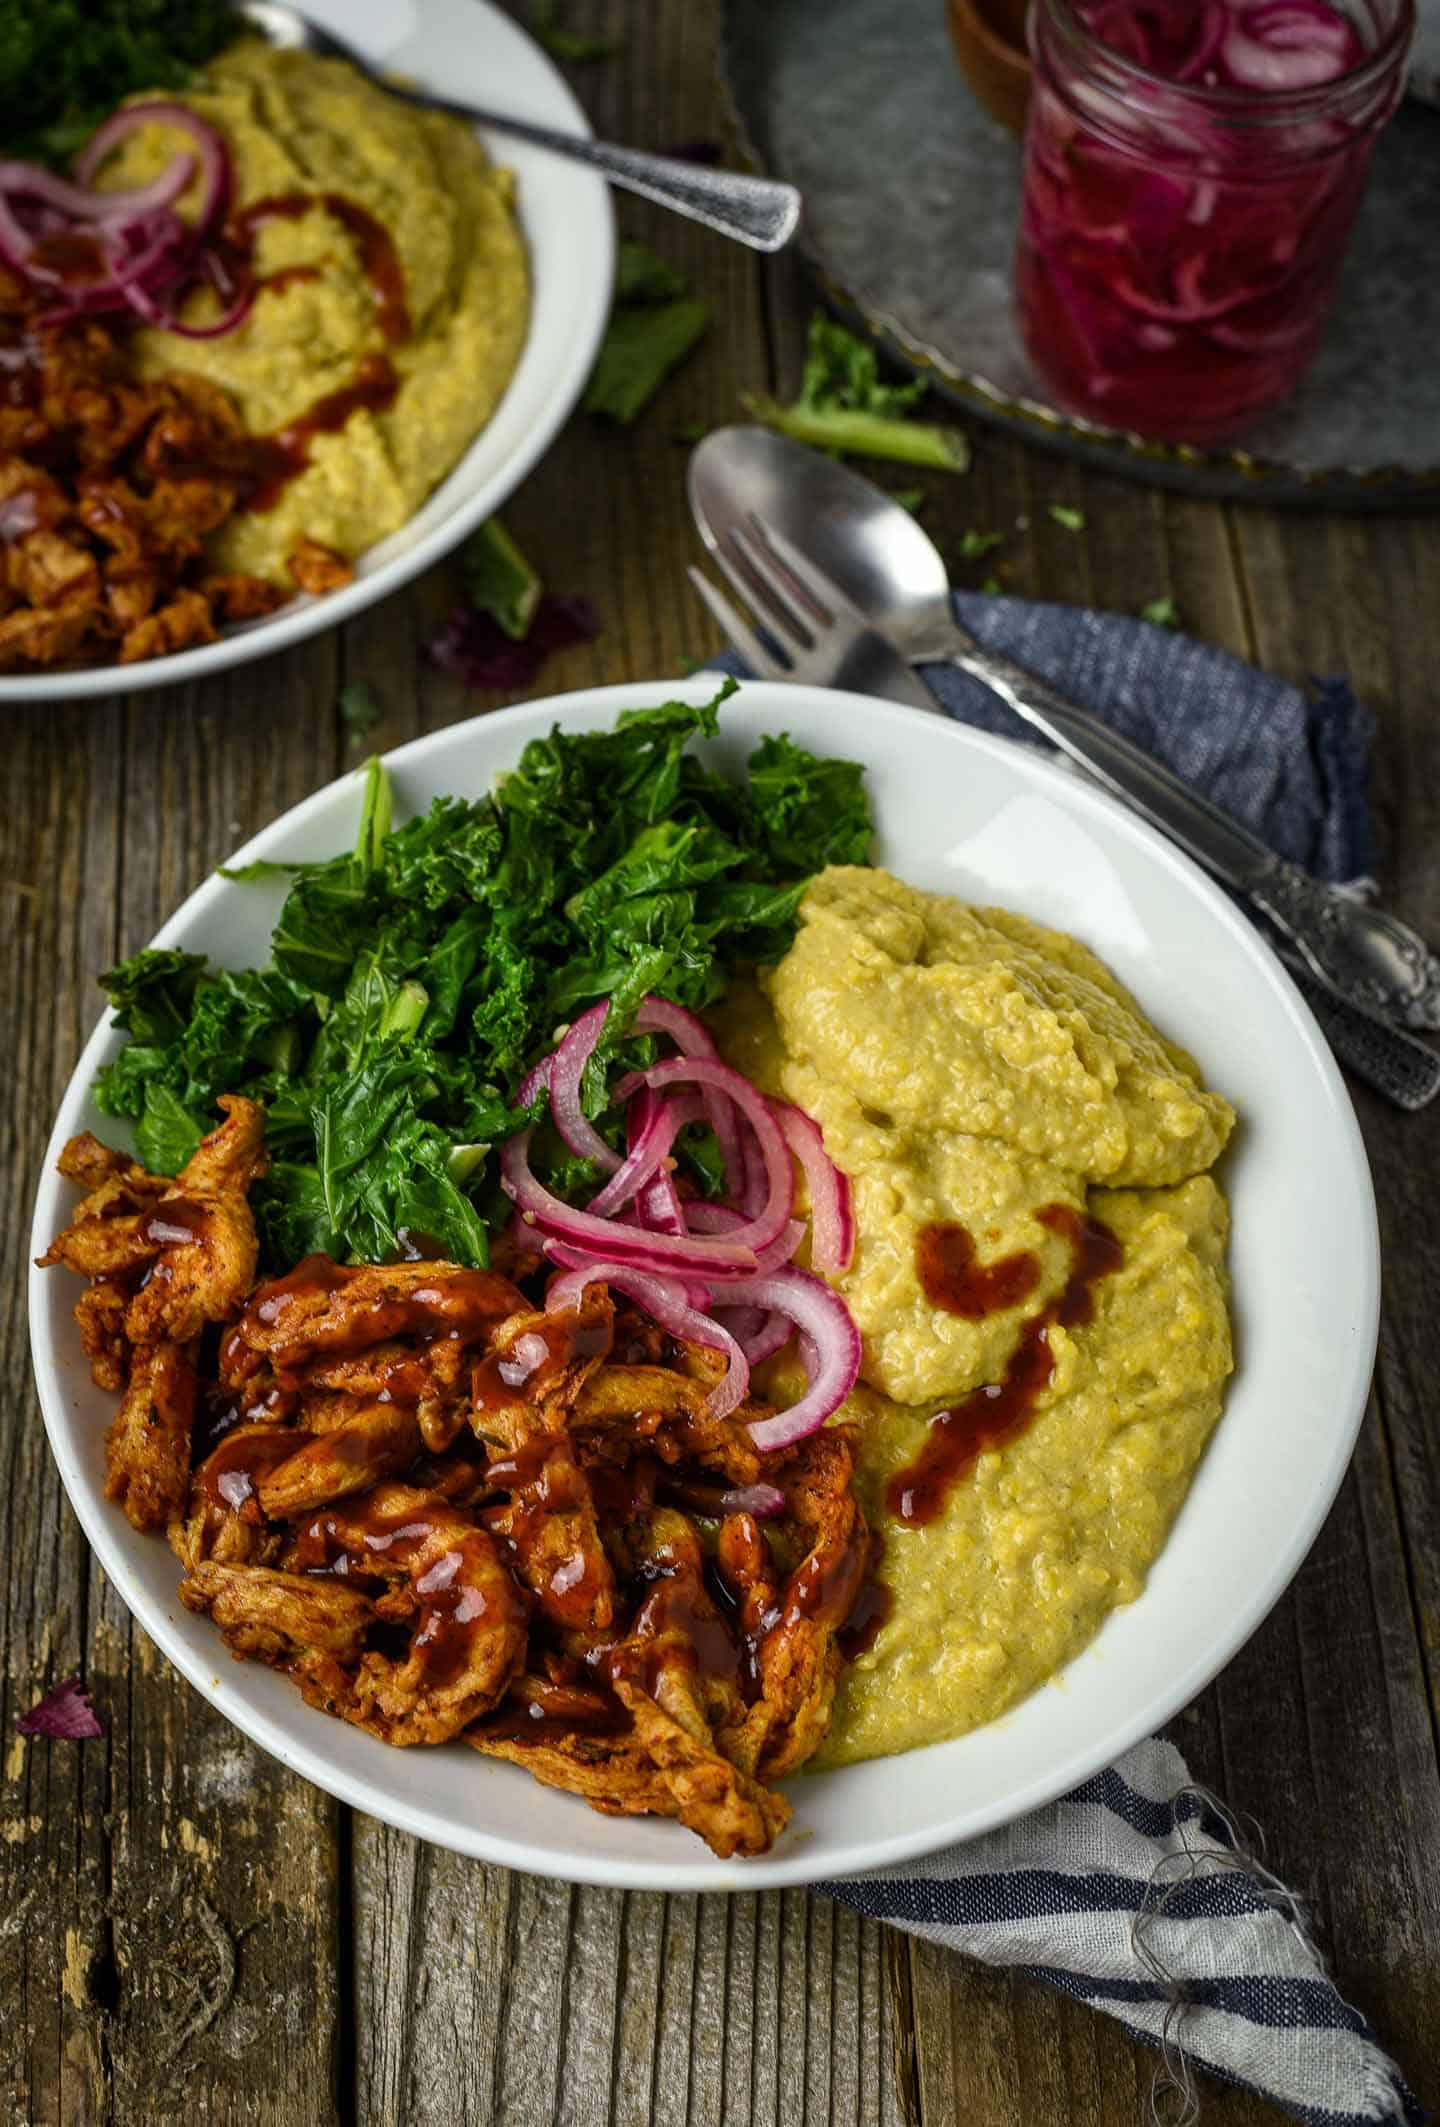 Vegan Grits Bowl with BBQ Soy Curls and Sauteed Kale is the definition of comfort food. A delicious and healthy plant-based breakfast bowl featuring creamy cheesy grits, hearty bbq soy curls, and greens.